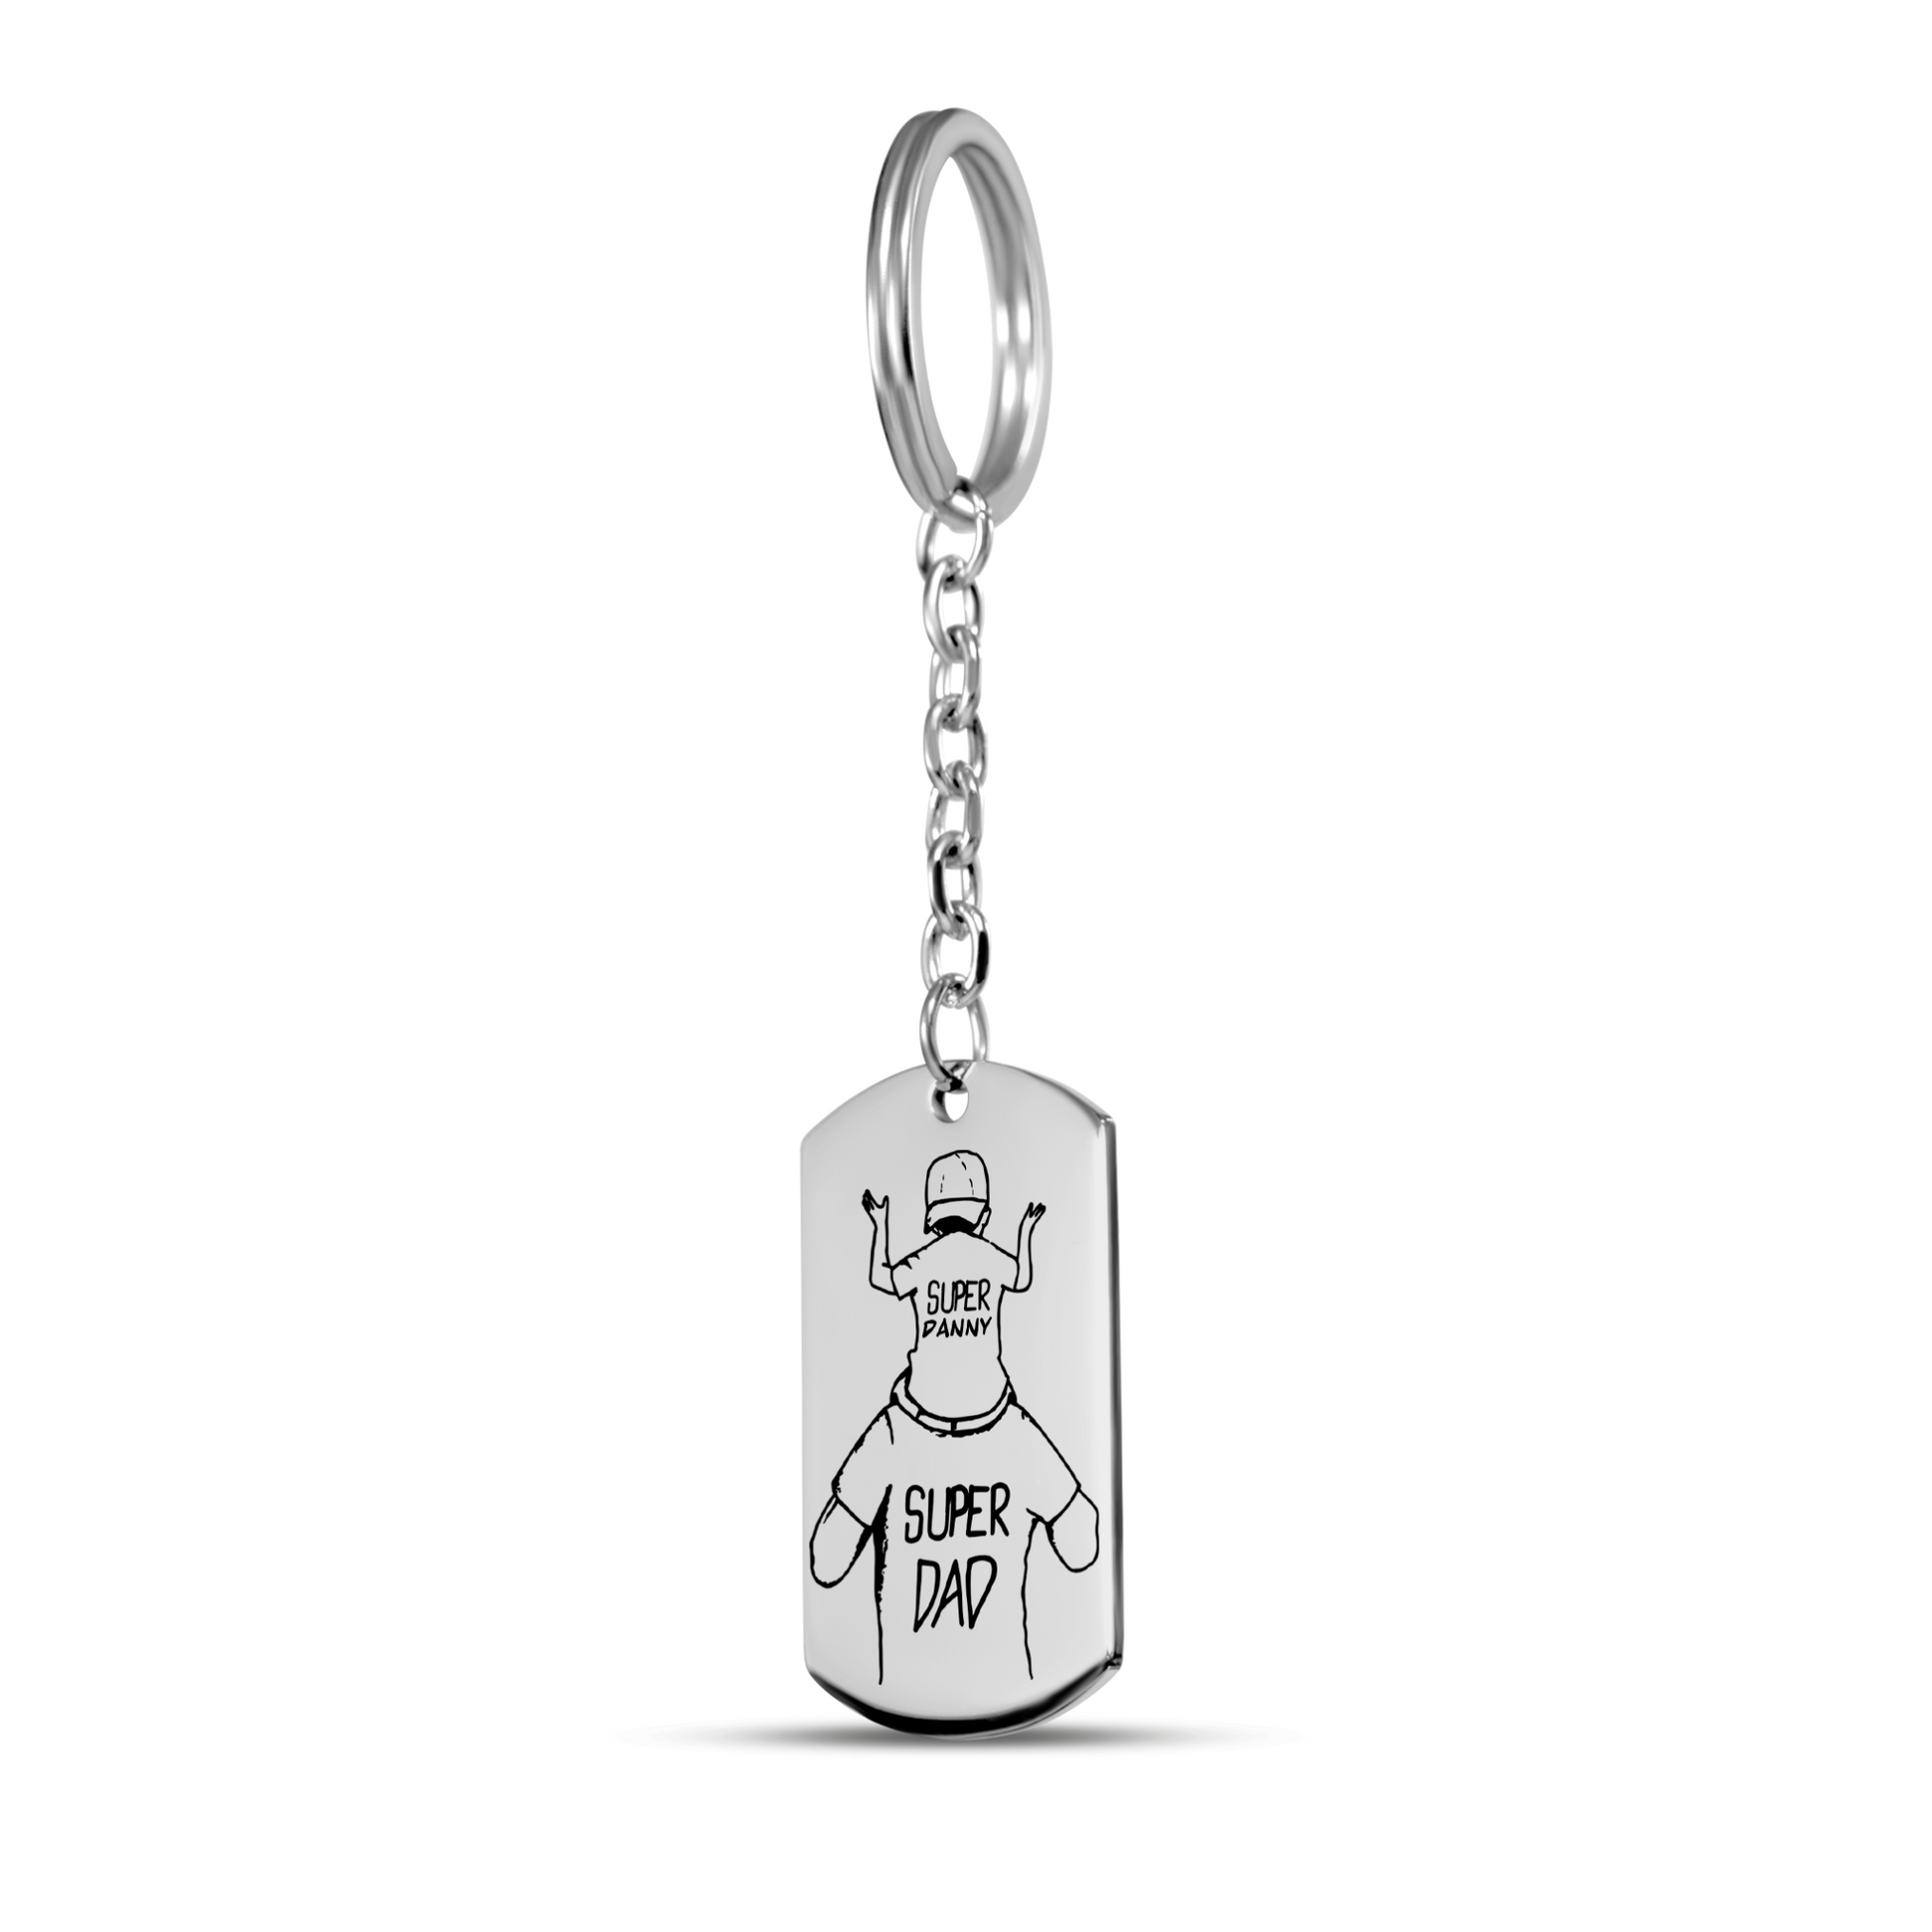 Personalized Keyrings - Super Dad And Son Keychain 